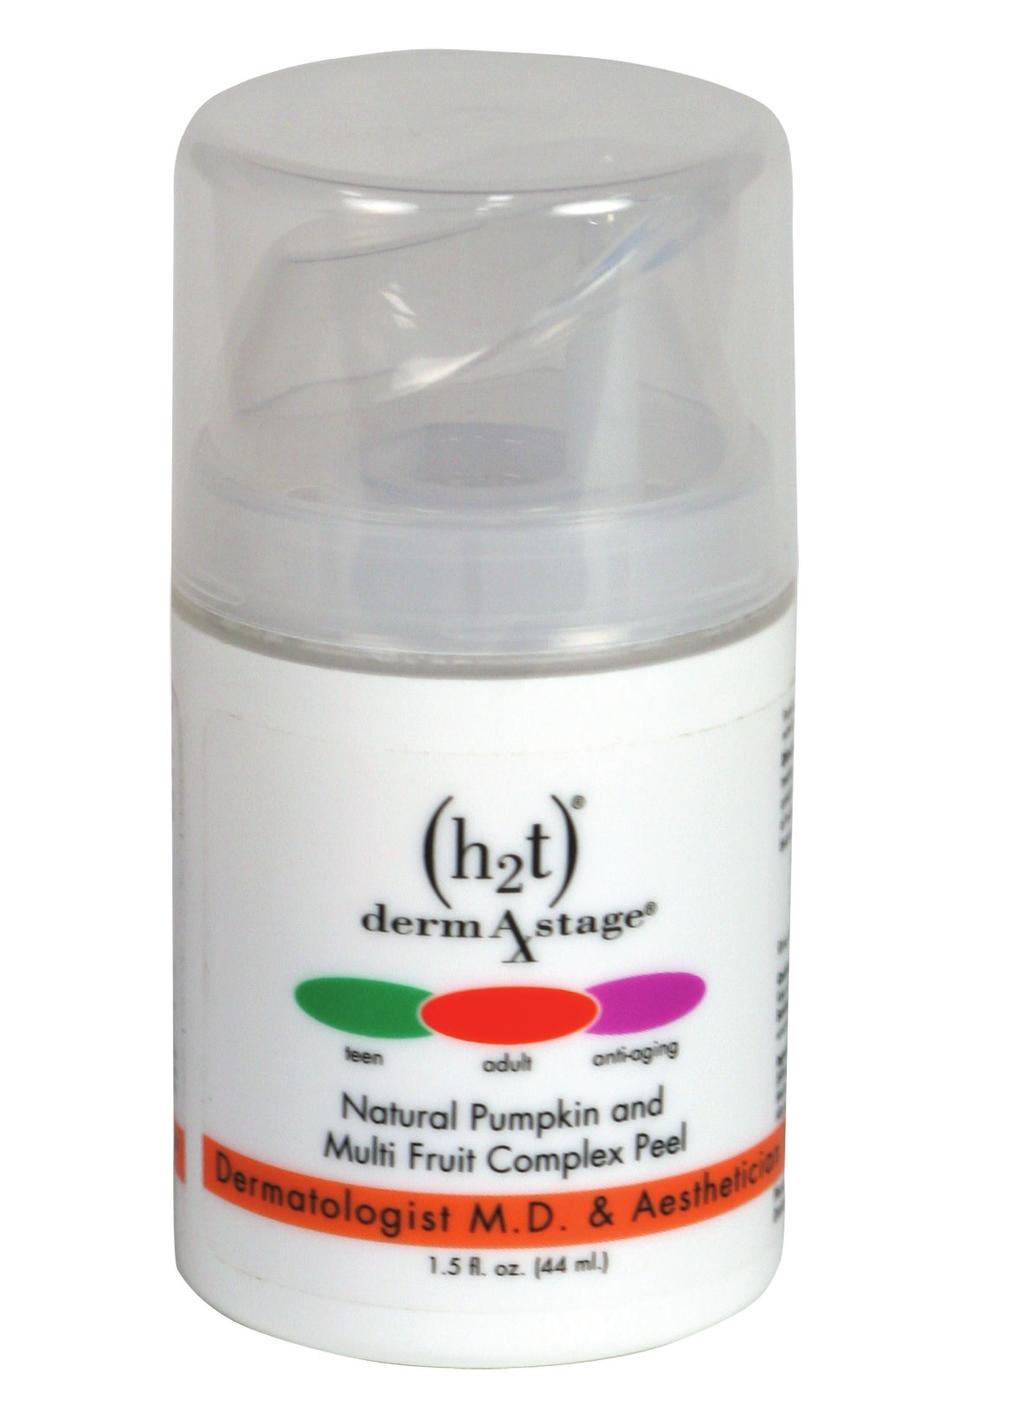 Natural Pumpkin and Multi-Fruit Complex Peel Pumpkin peel is an intensive exfoliating and rejuvenating treatment for all skin types.